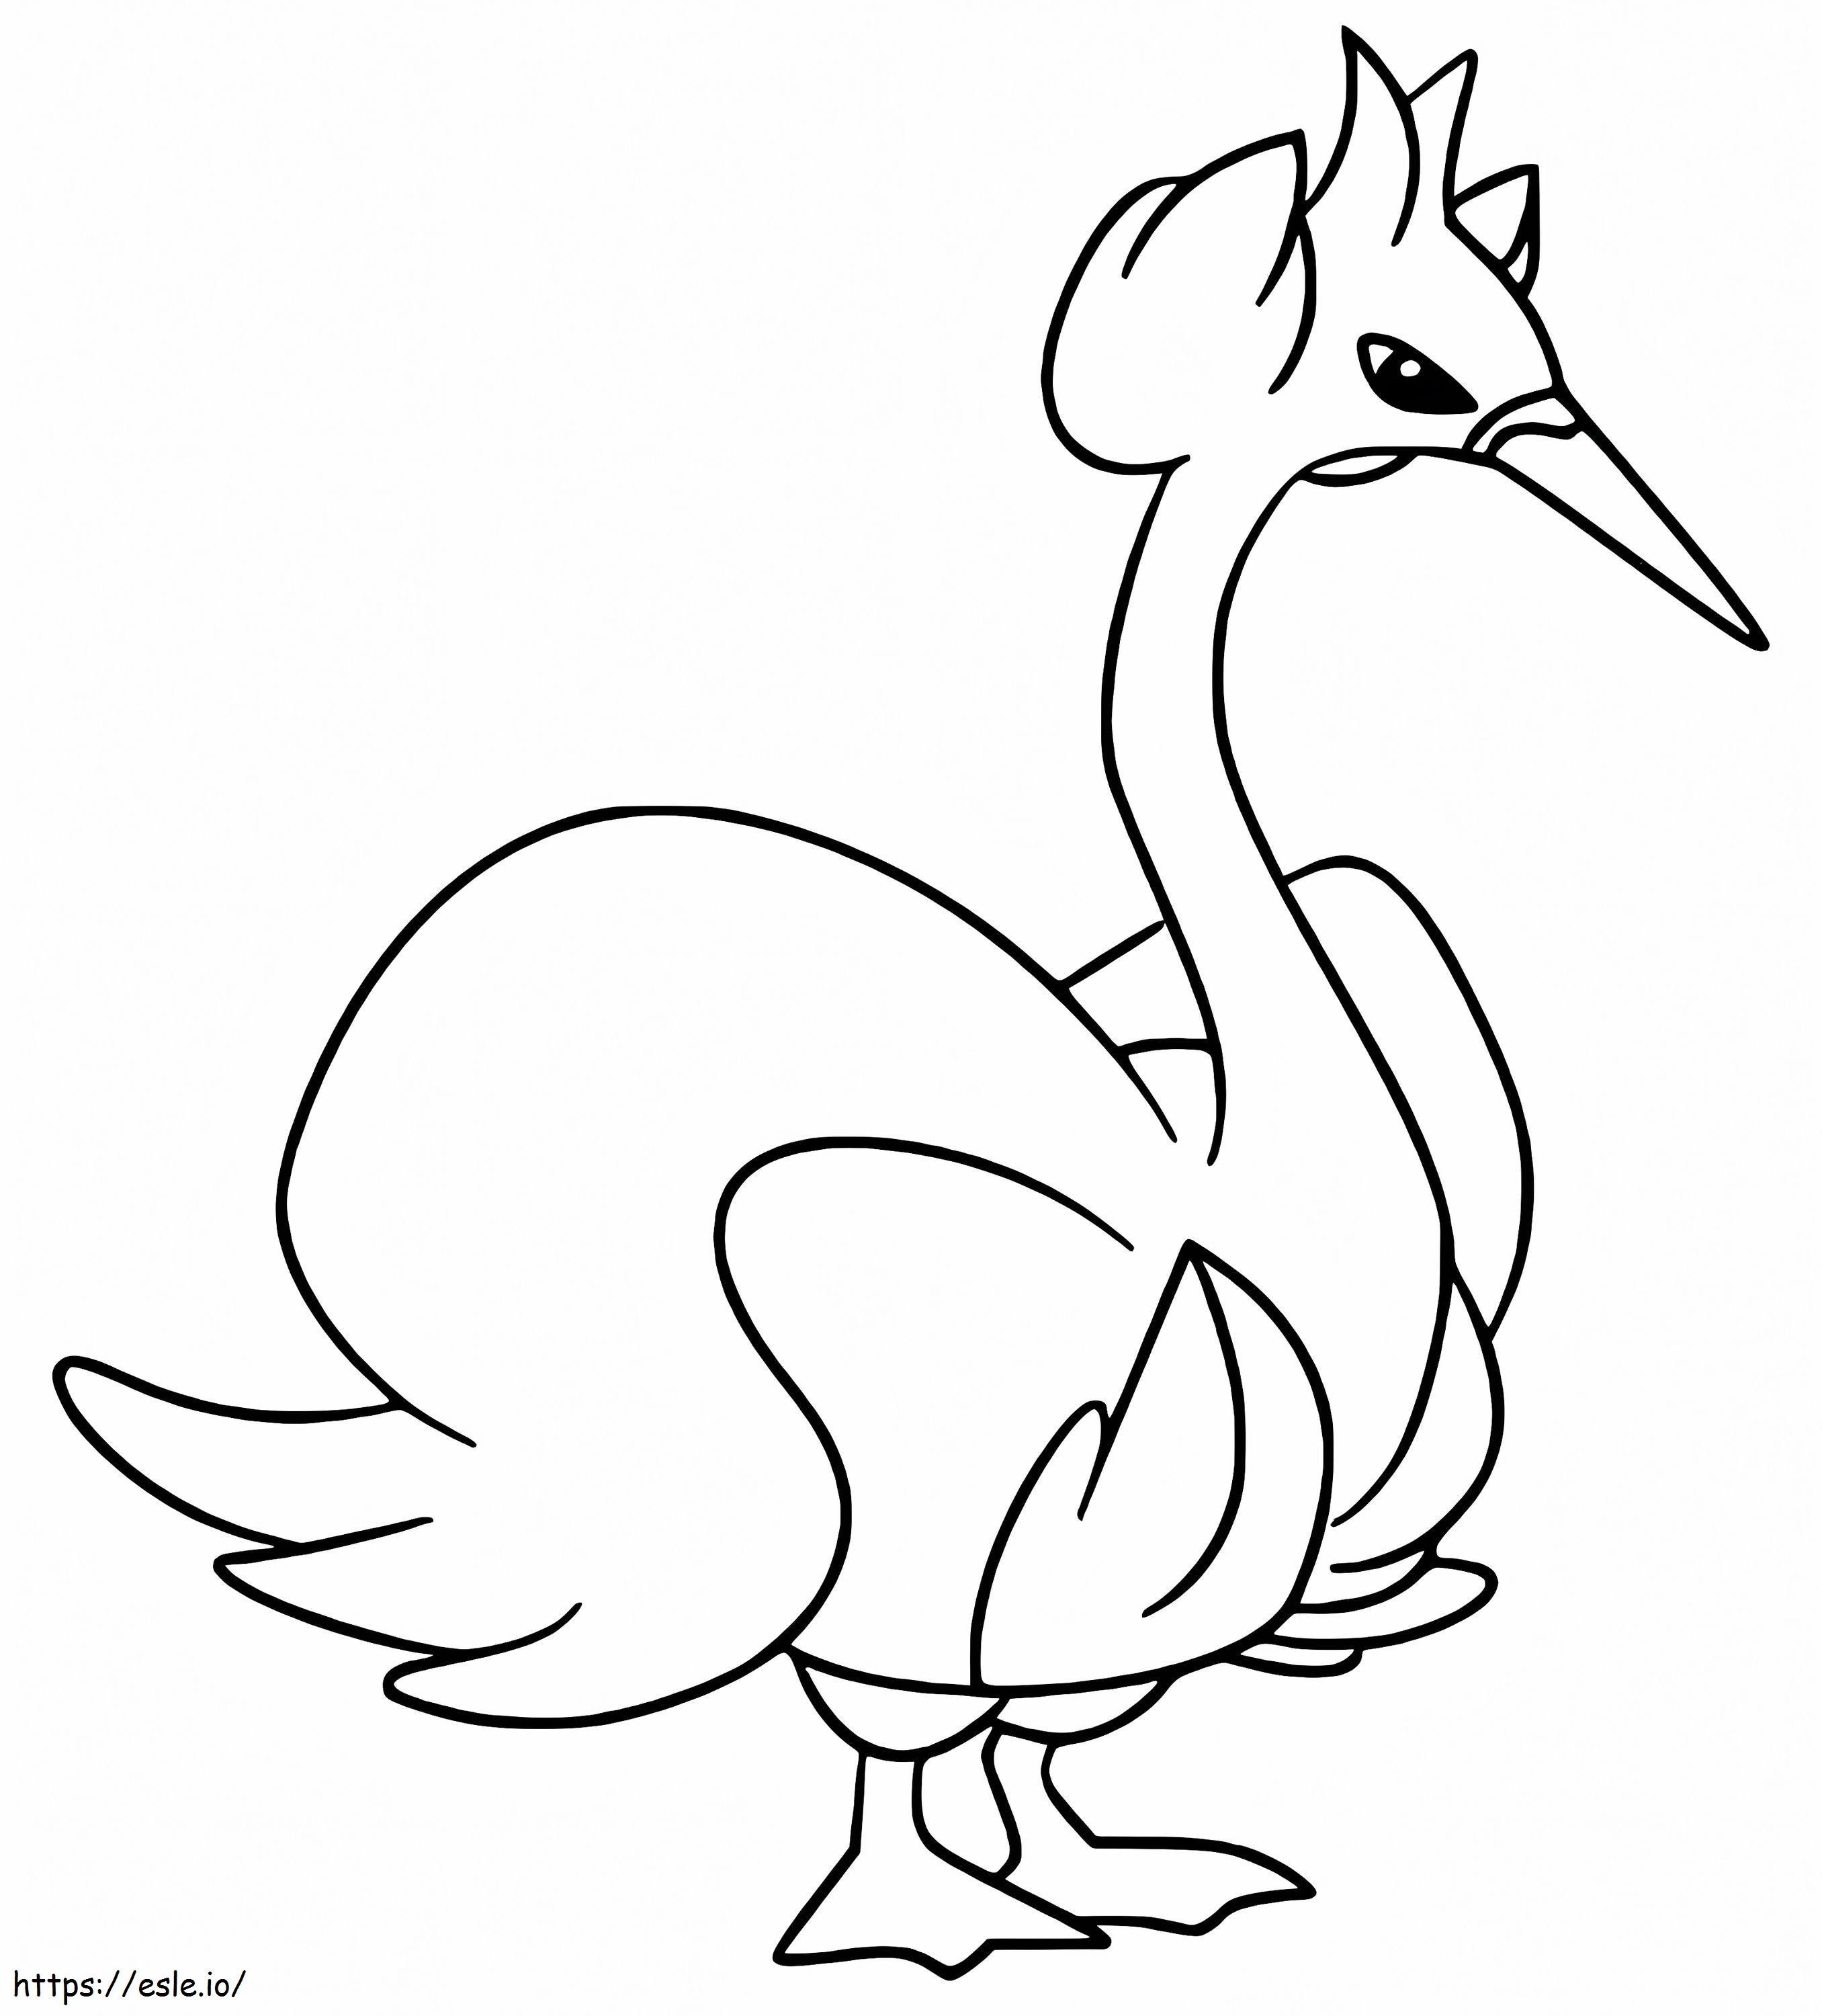 Printable Swanna coloring page